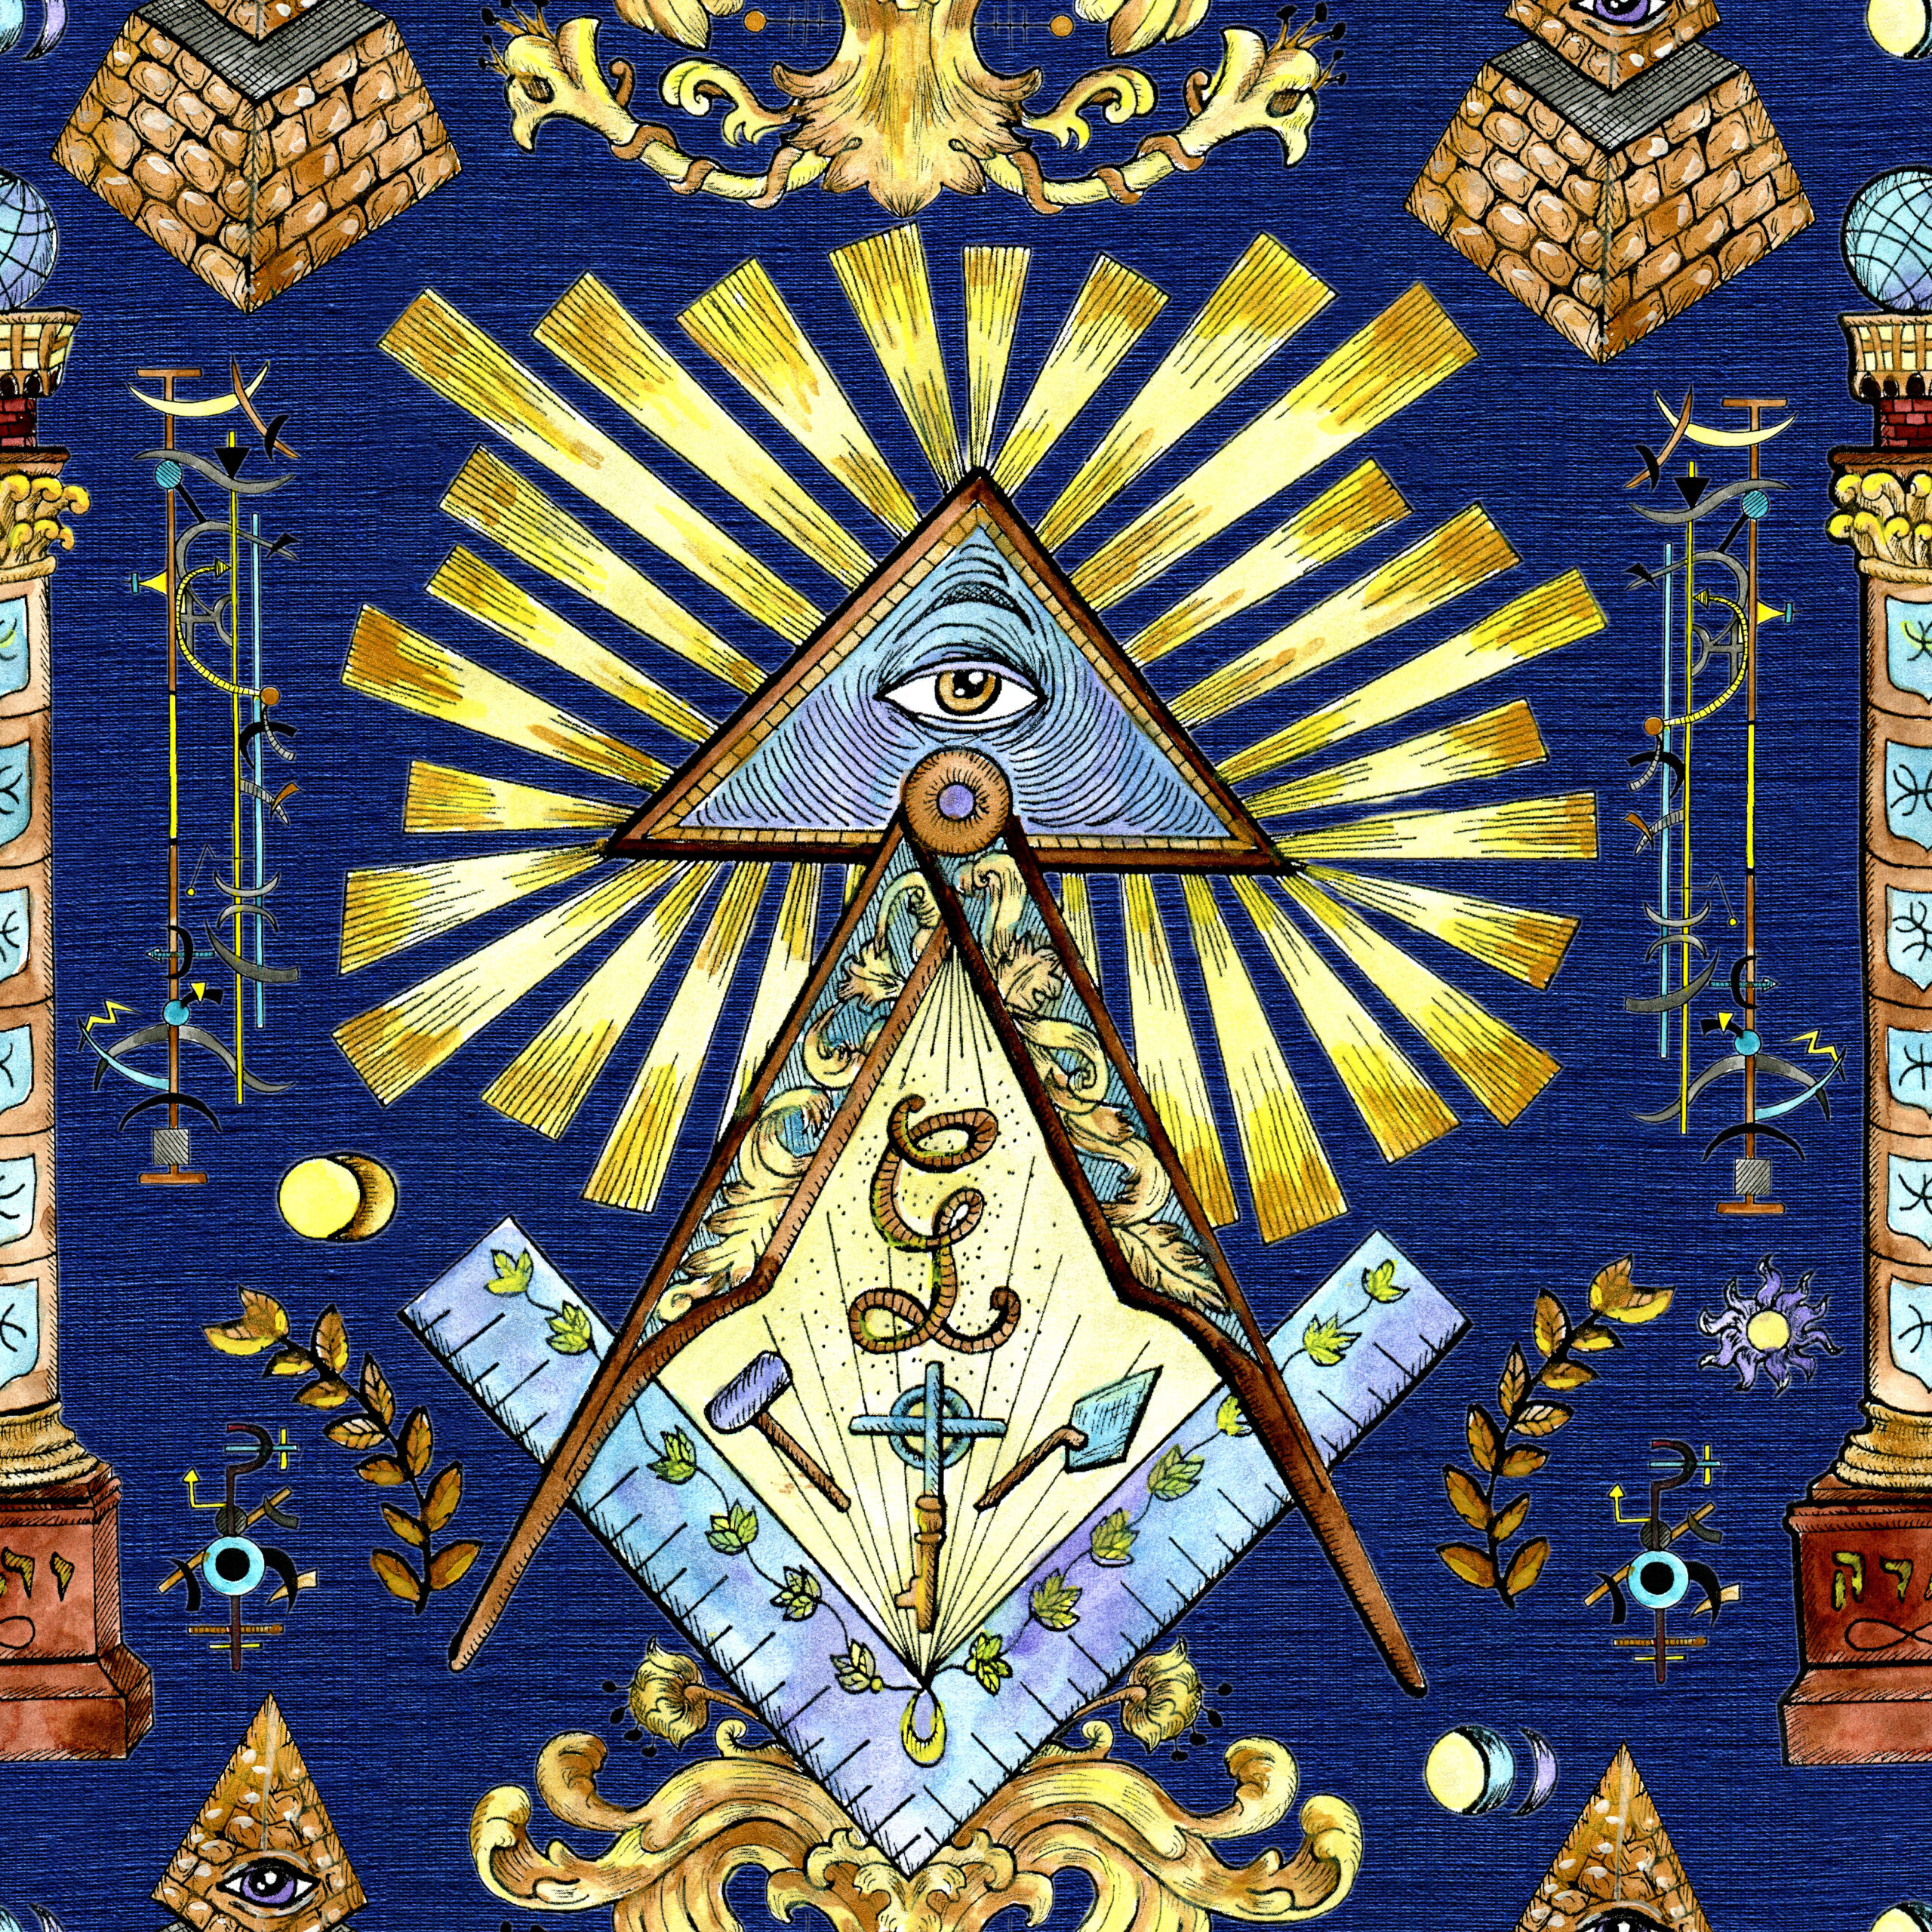 Seamless background with mason and mystic symbols on blue. Freemasonry and secret societies emblems, occult and spiritual mystic drawings. Tattoo fantasy design, new world order